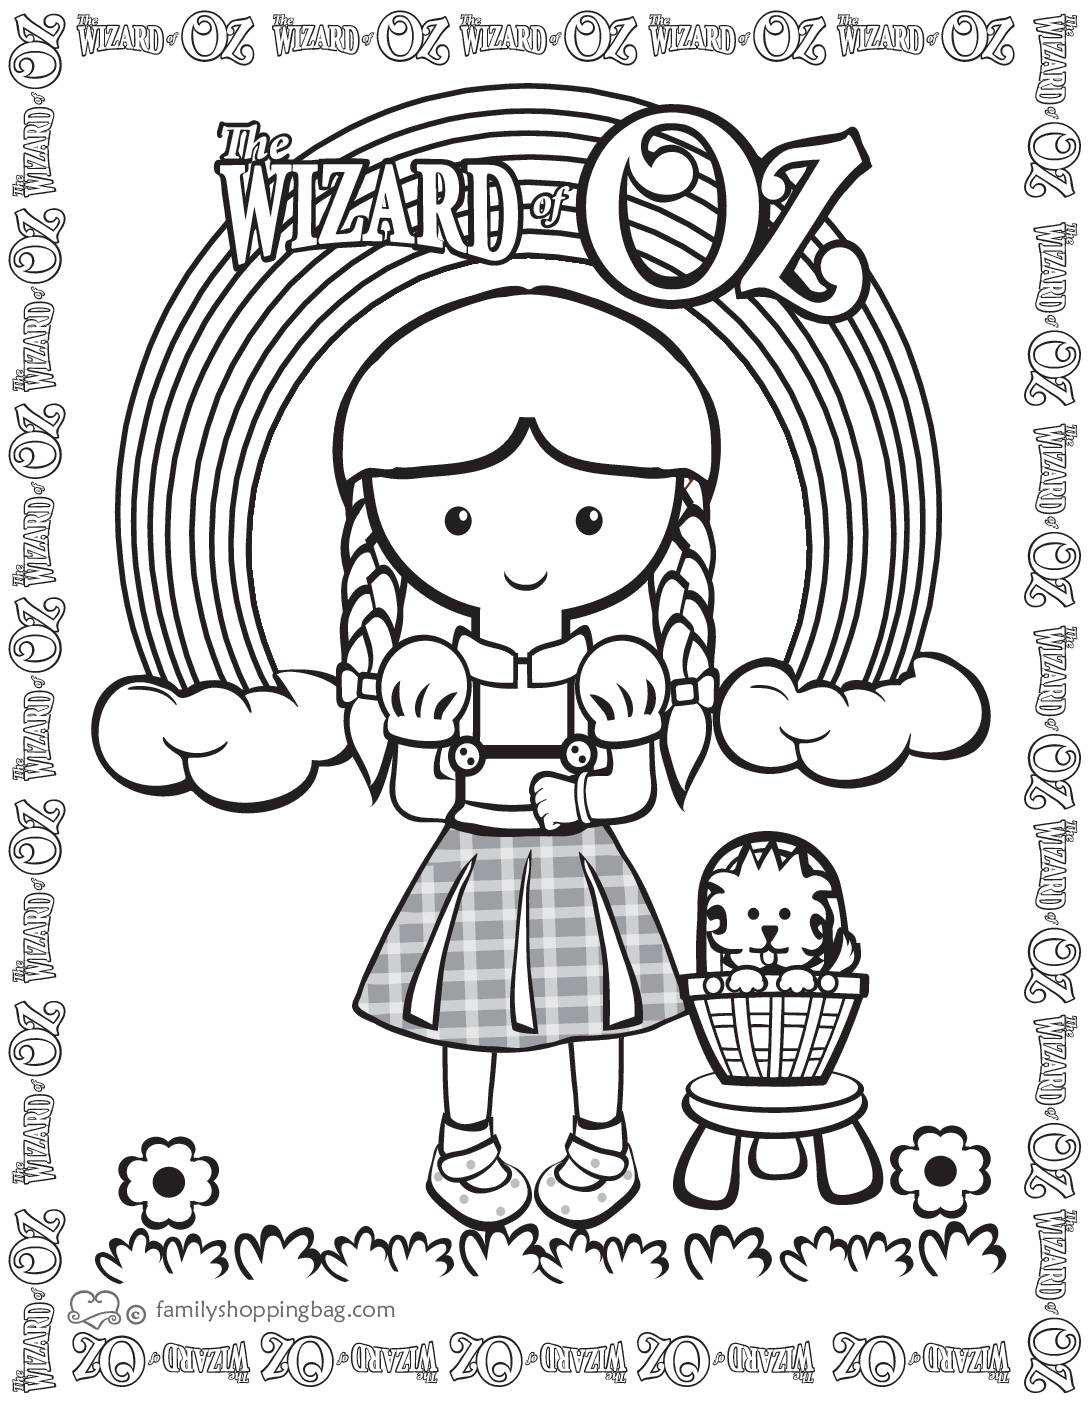 Coloring Page 4 Wizard of Oz Coloring Pages